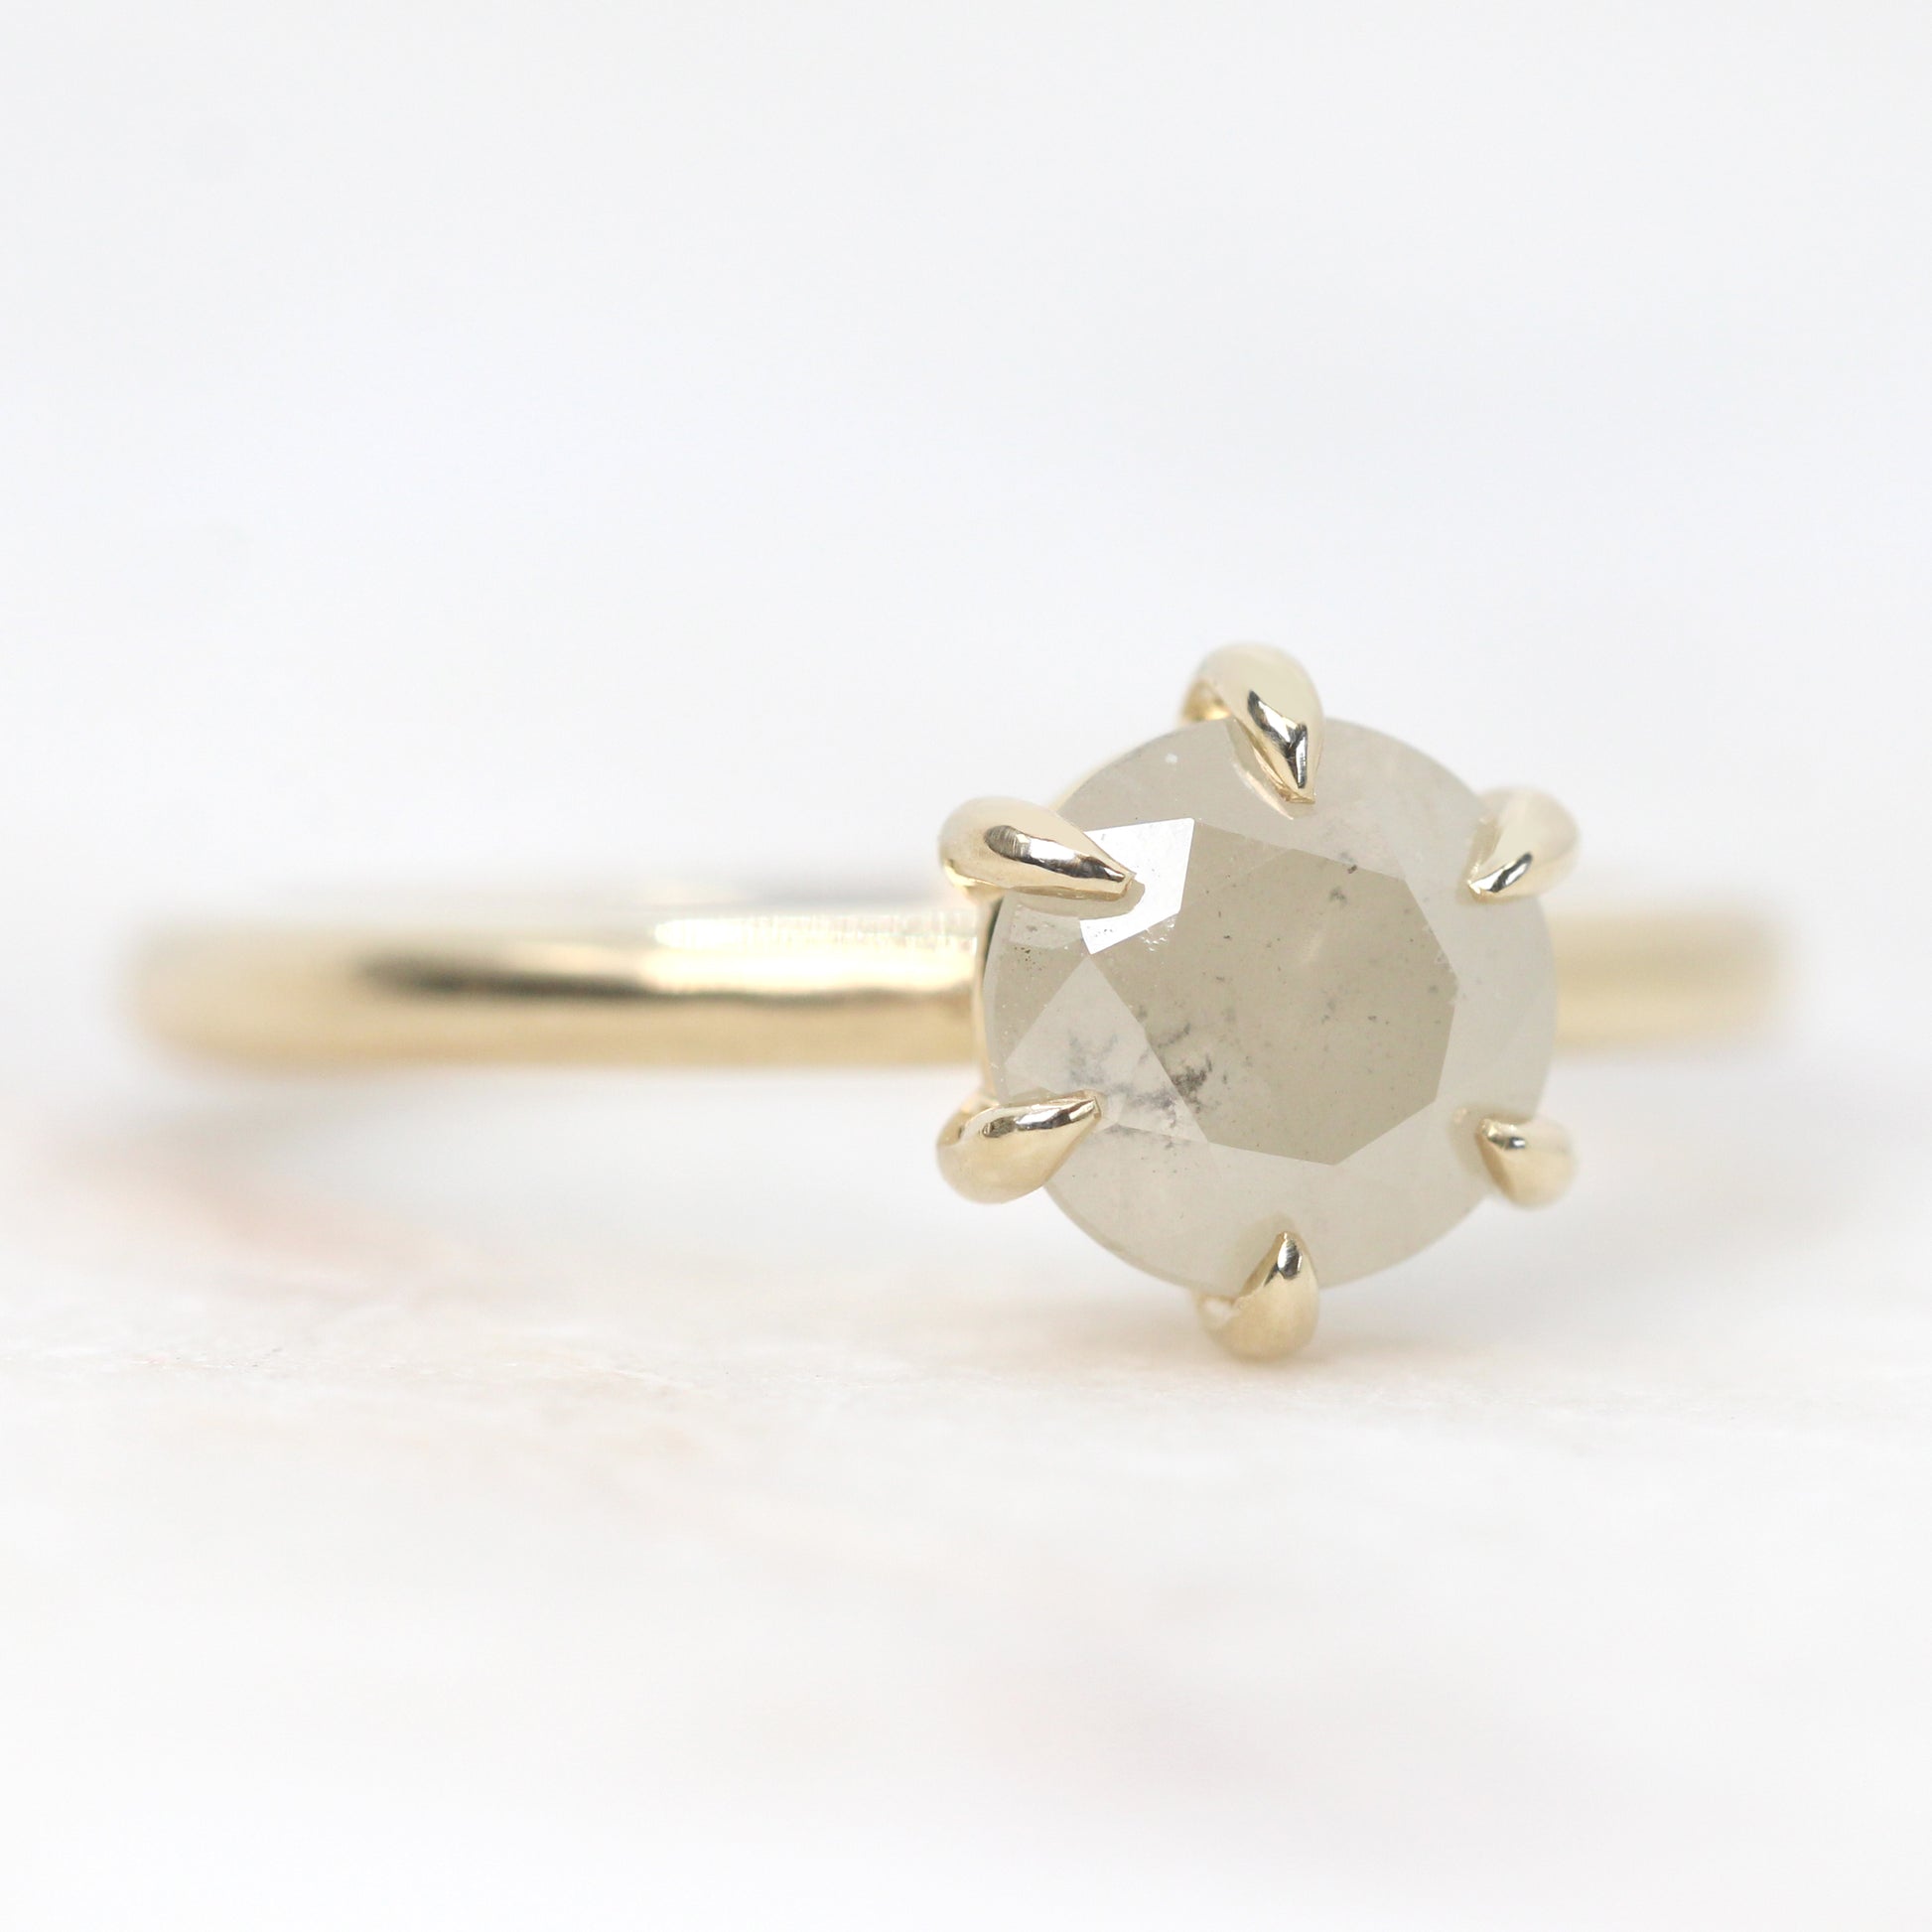 Charlotte Ring with a 1.55 Carat Round Misty White Celestial Diamond in 14k Yellow Gold - Ready to Size and Ship - Midwinter Co. Alternative Bridal Rings and Modern Fine Jewelry